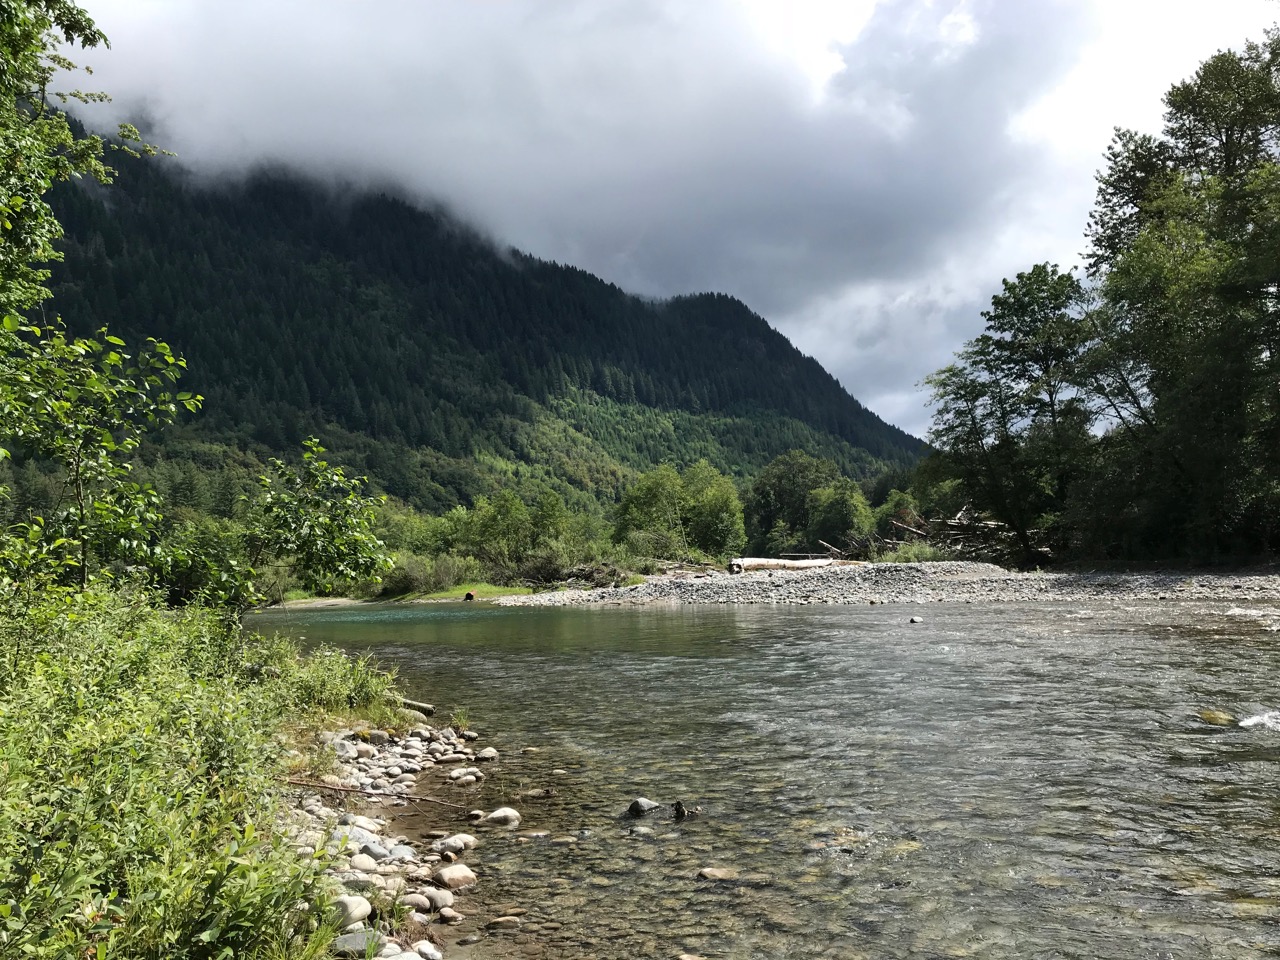 The Skagit River is a Federally designated Wild and Scenic River. Photograph credit: Skagit Land Trust staff.